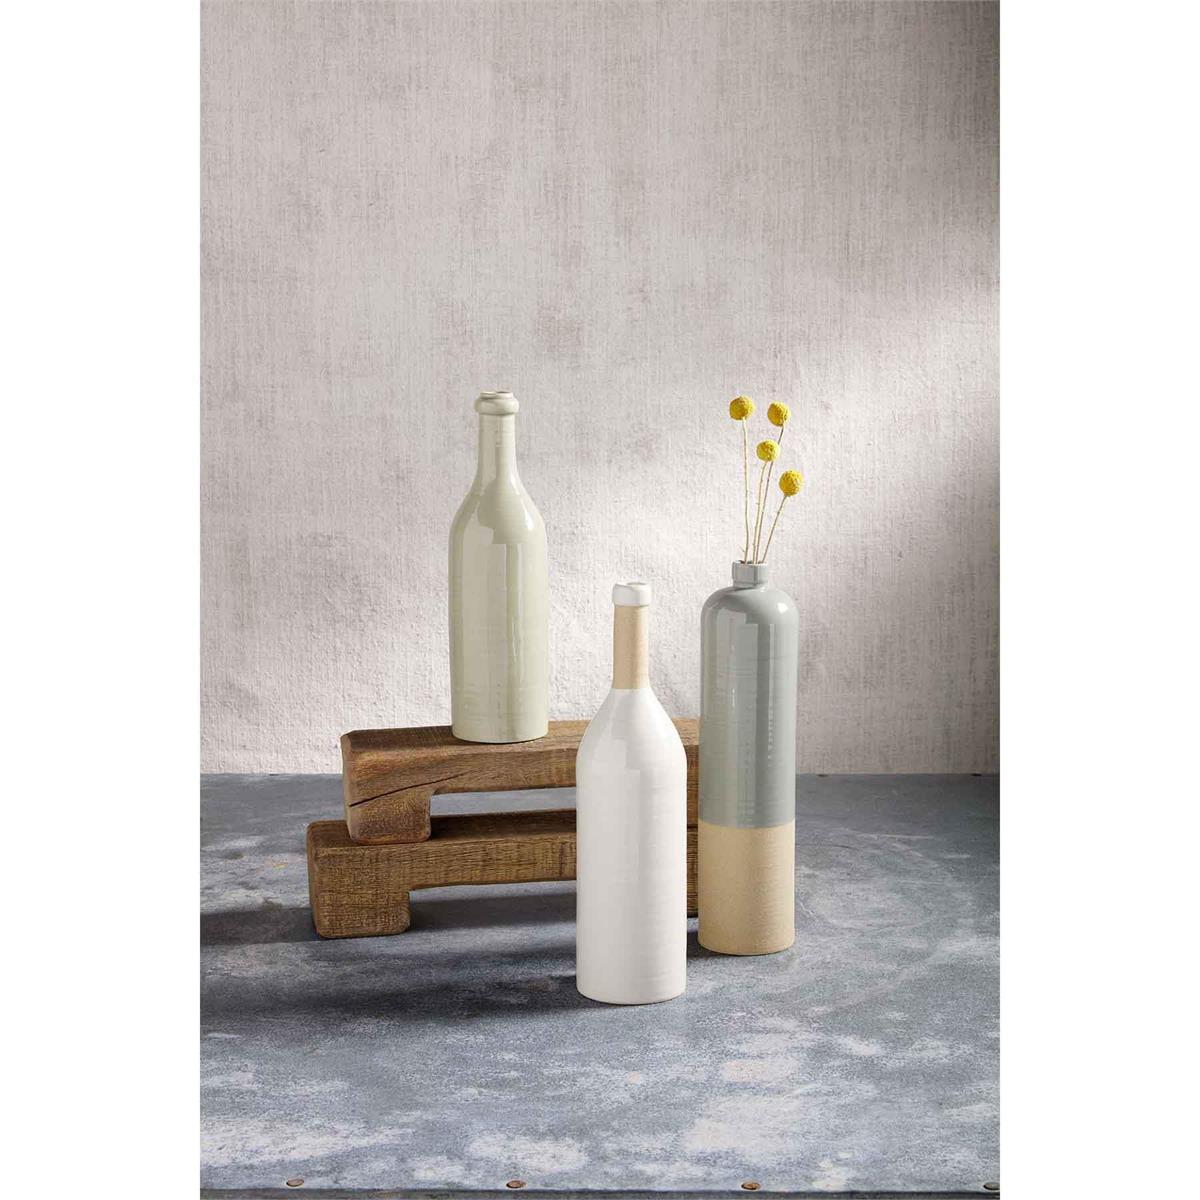 small and large reclaimed wooden risers displayed with three vases on a gray surface